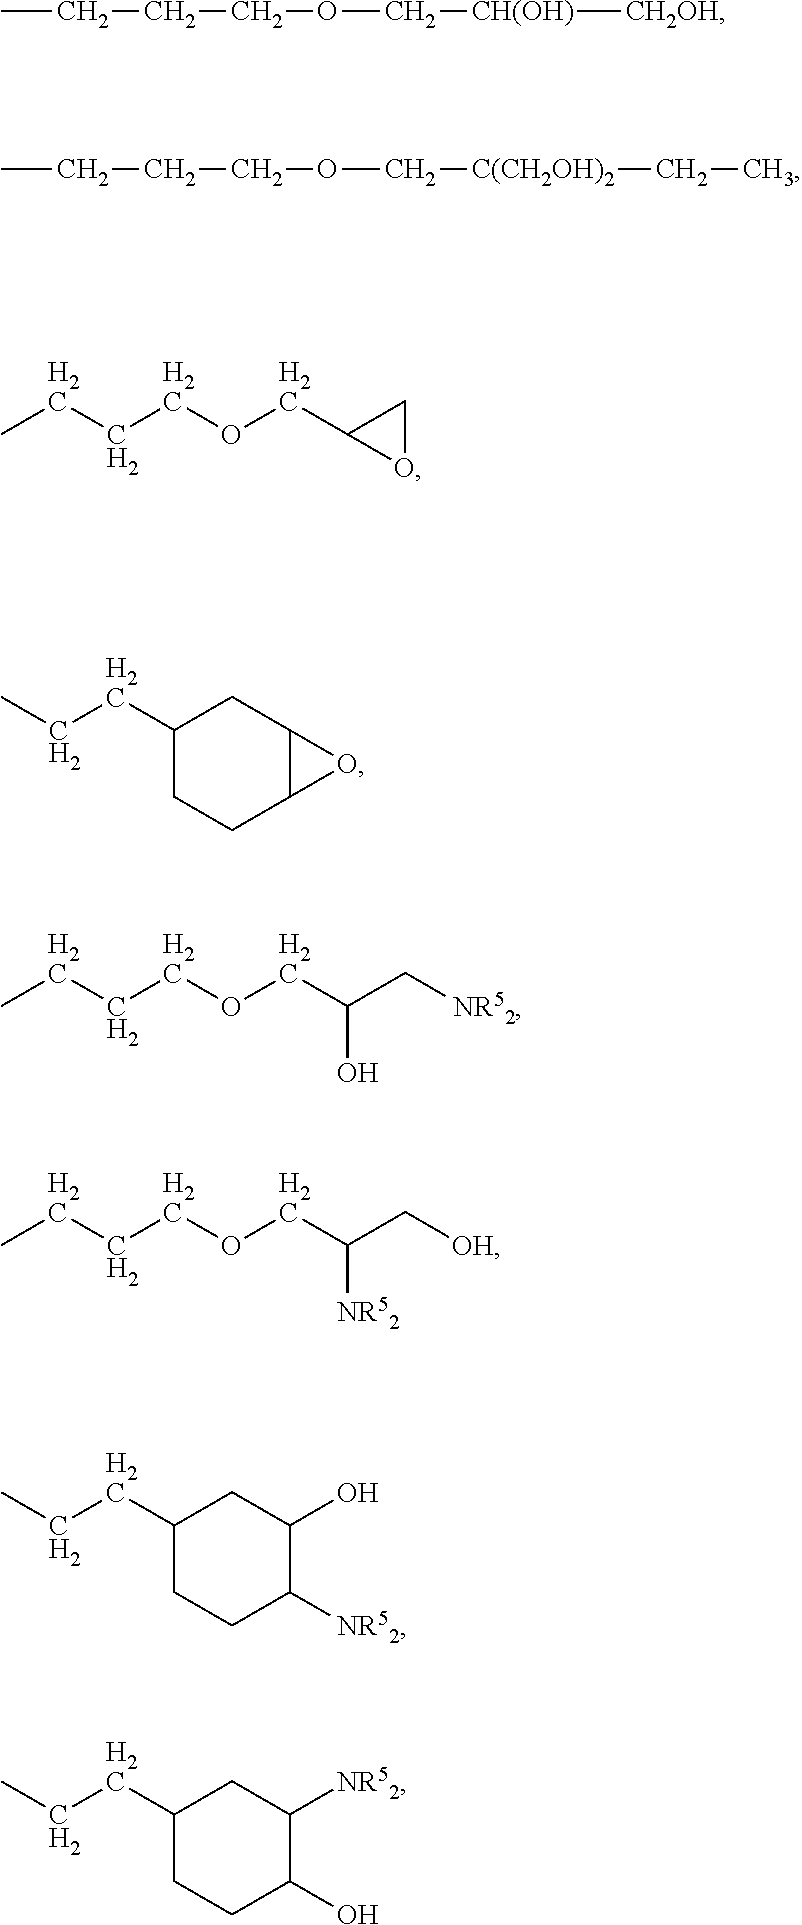 Defoamer compositions for building-product mixtures